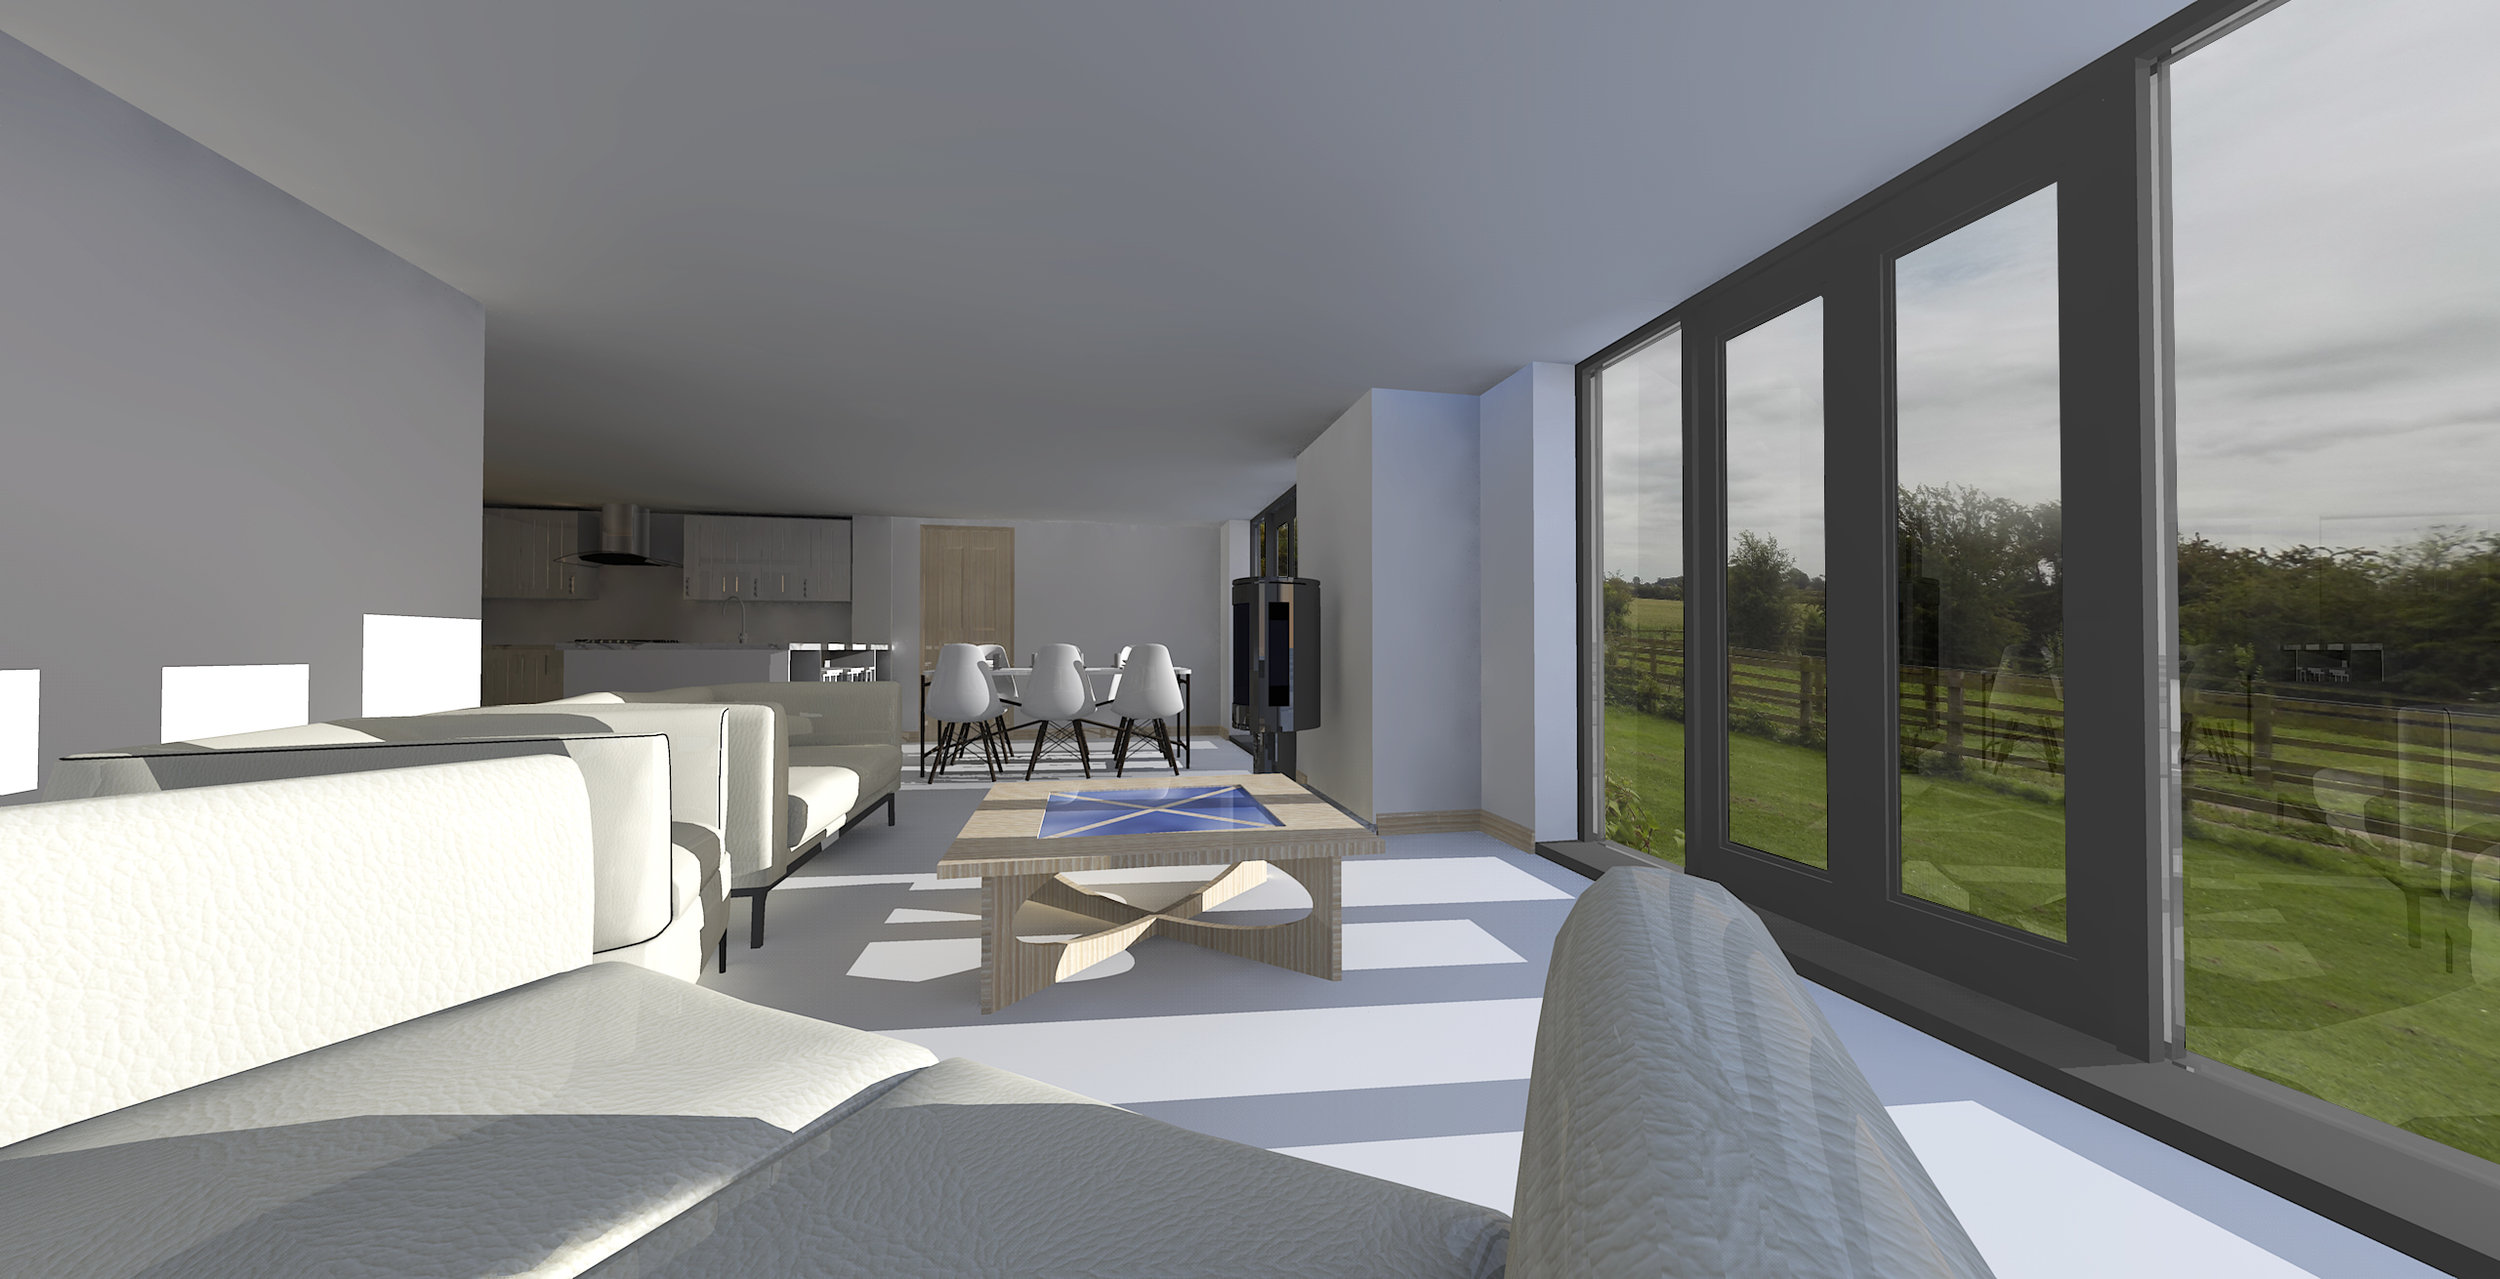 Proposed Day Room - Catfoss House - East Yorkshire Architects - Samuel Kendall Associates